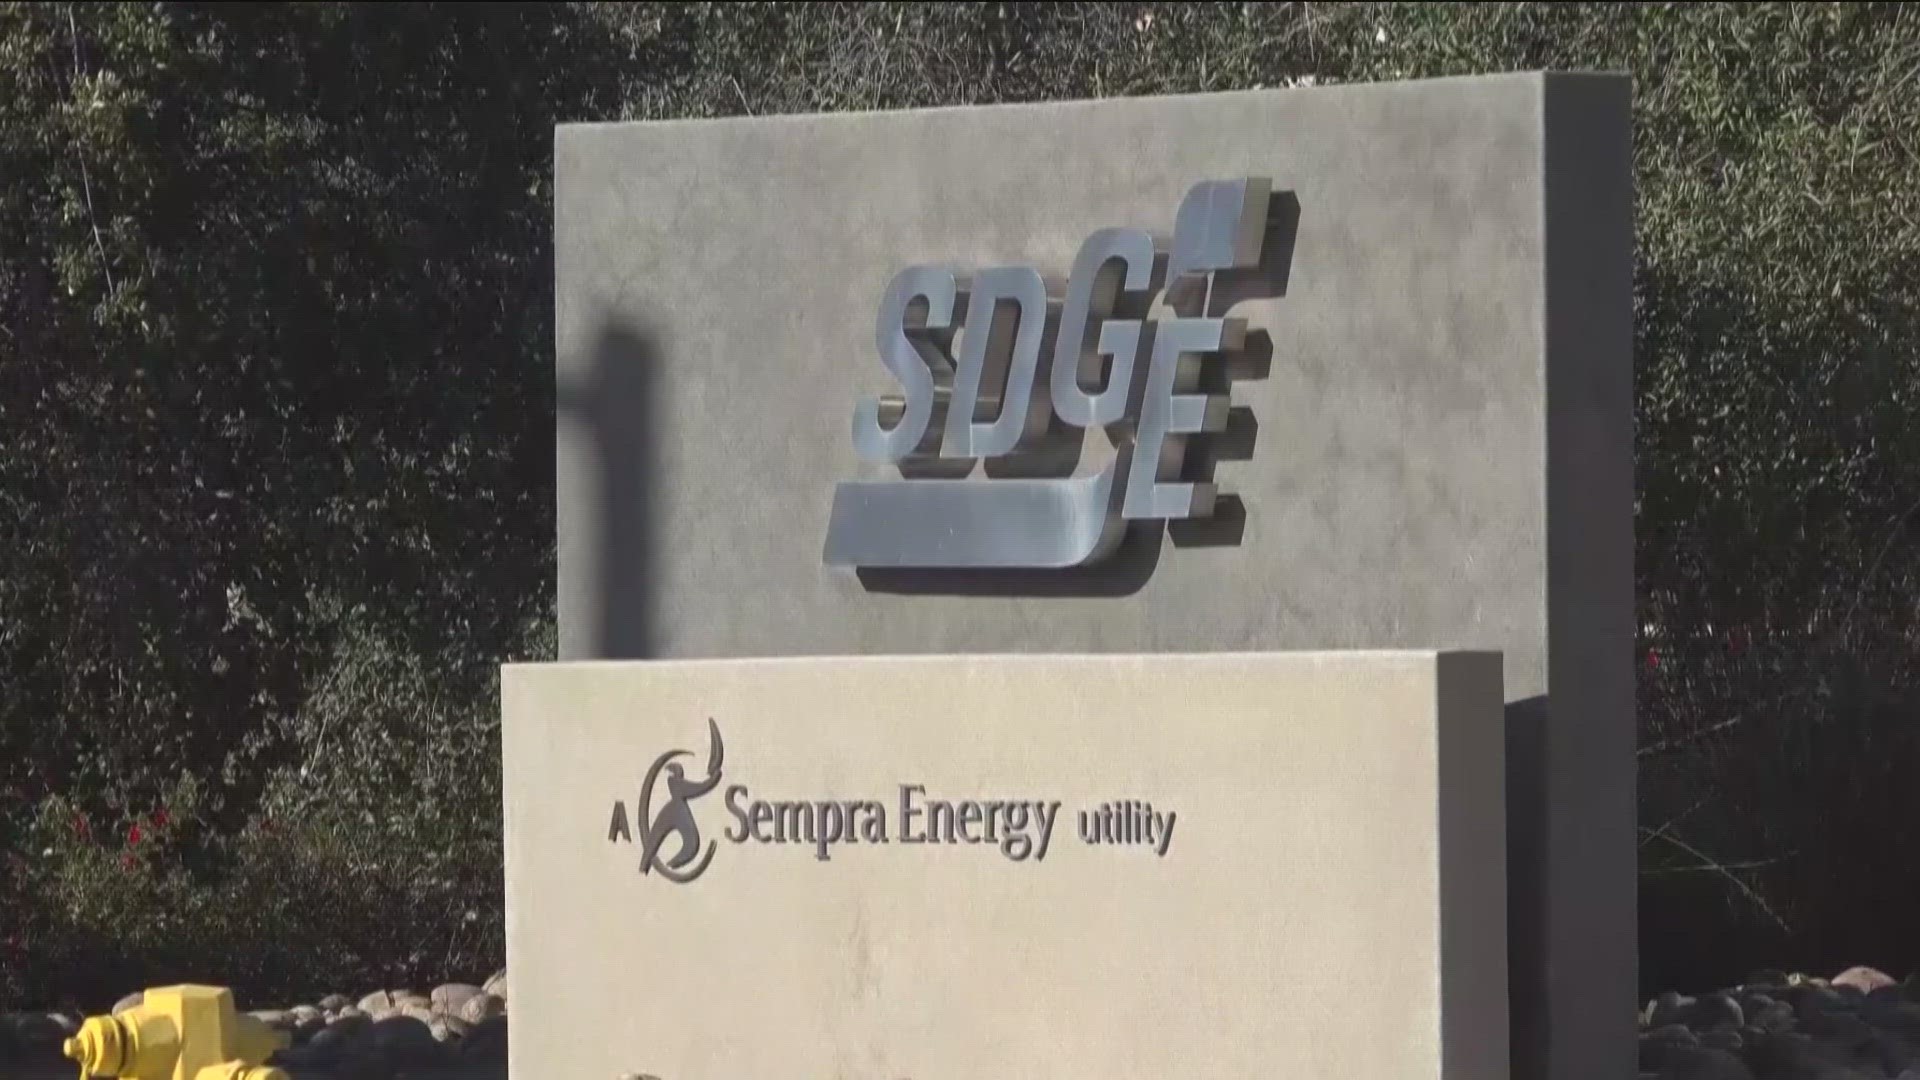 Power San Diego demonstrated outside Sempra Energy headquarters Tuesday morning.